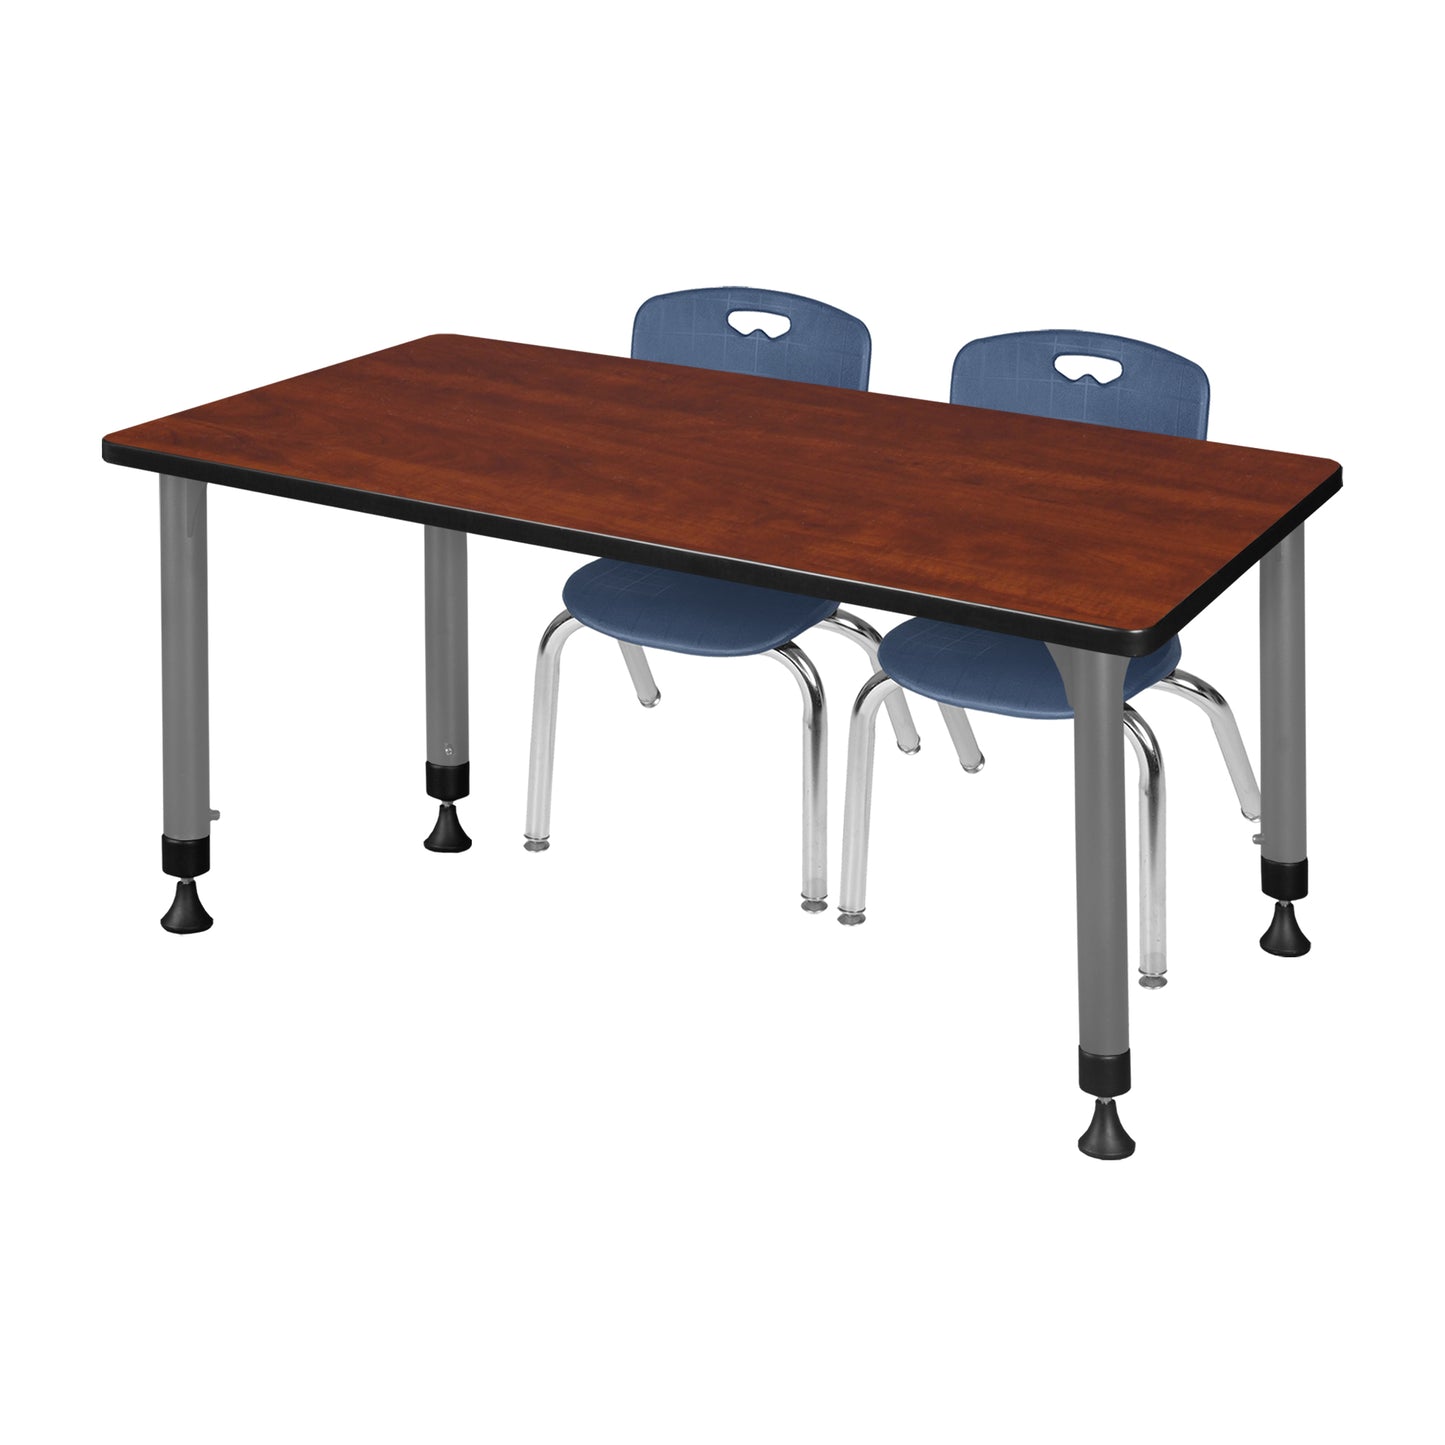 Regency Kee 60 x 30 in. Adjustable Classroom Table & 2 Andy 12 in. Stack Chairs